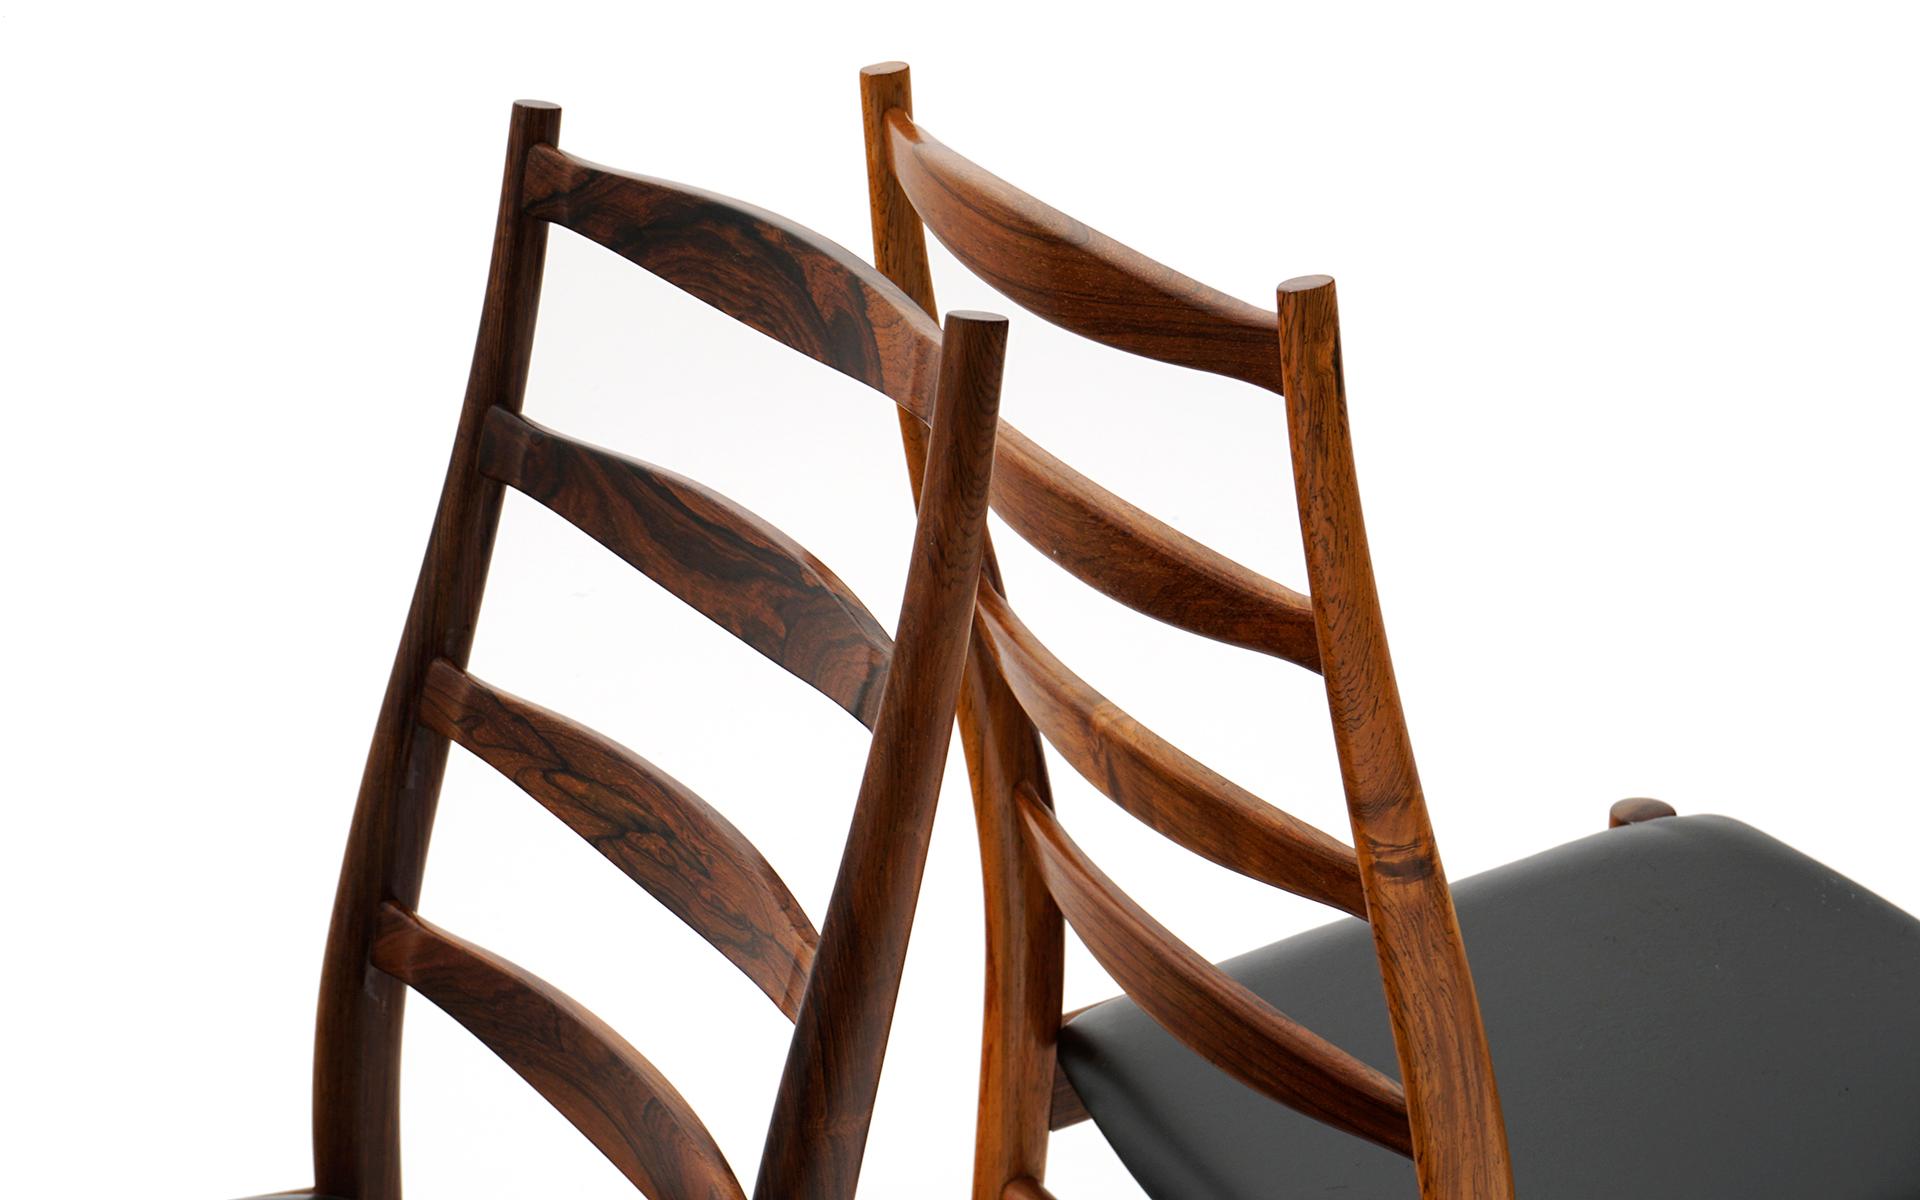 Upholstery Six Danish Modern Rosewood Ladder Back Dining Chairs by Arne Vodder, Black Seats For Sale